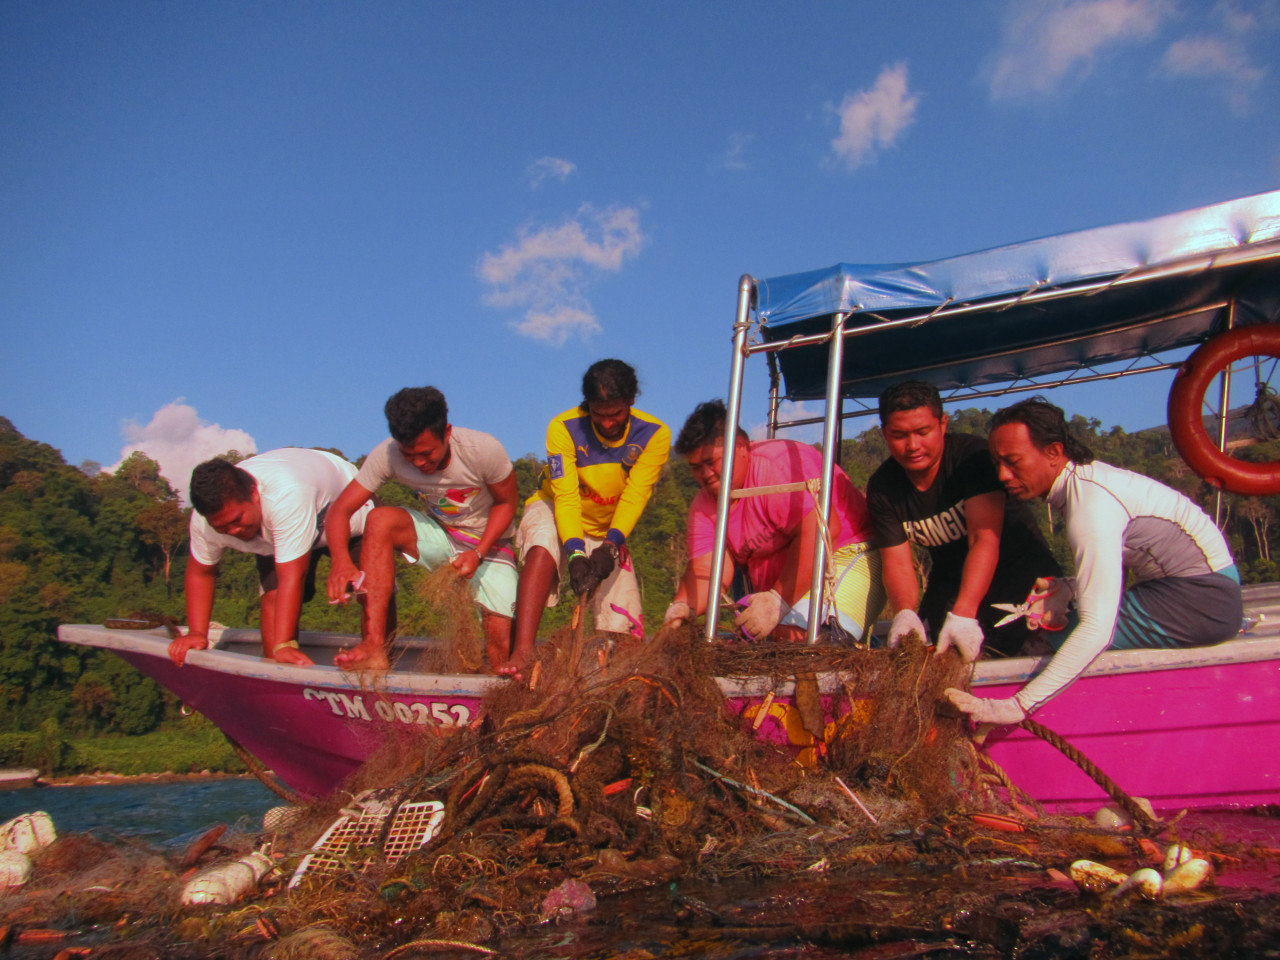 Removing ghost nets with the help of the Tioman Marine Conservation Group (TMCG). - Pic courtesy of TMCG